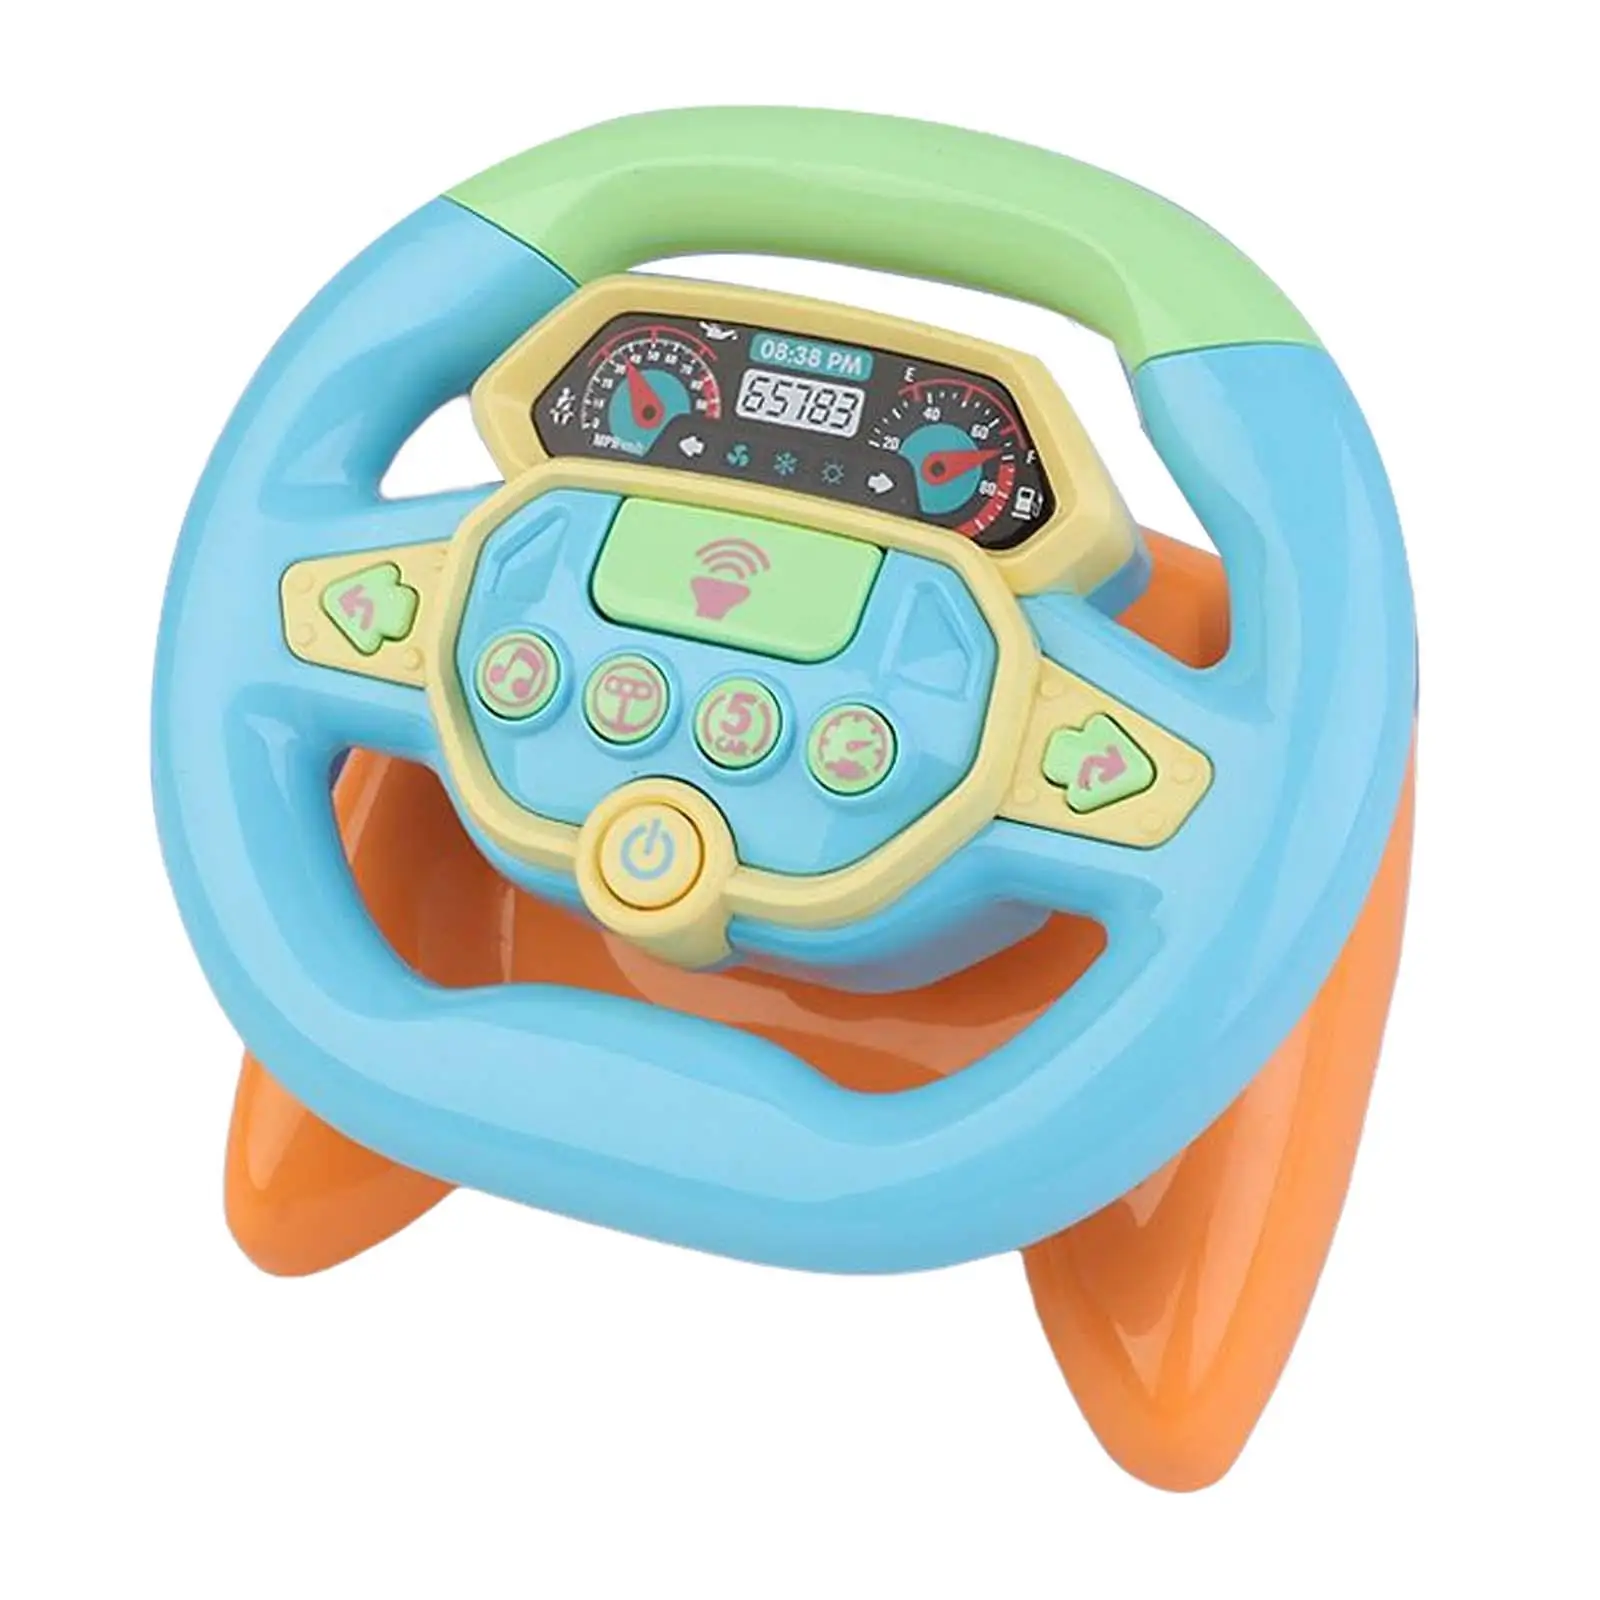 Rotating Driving Steering Wheel Toy Educational Learning Toy Pretend Play